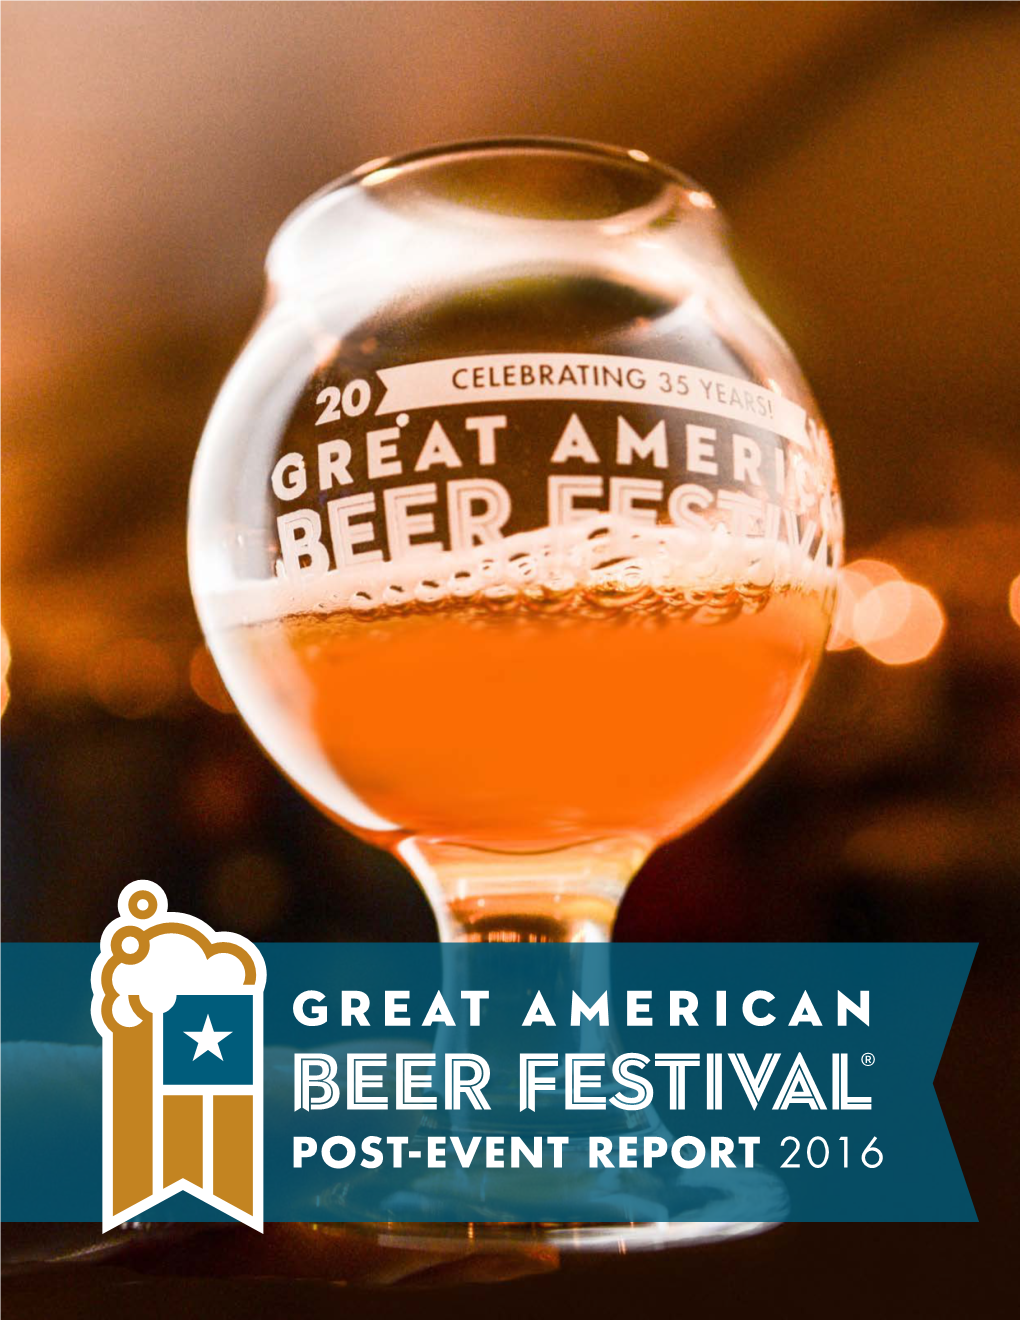 POST-EVENT REPORT 2016 “GABF Provides an Incredible Opportunity to Support Our Current Customers and Meet New Prospects